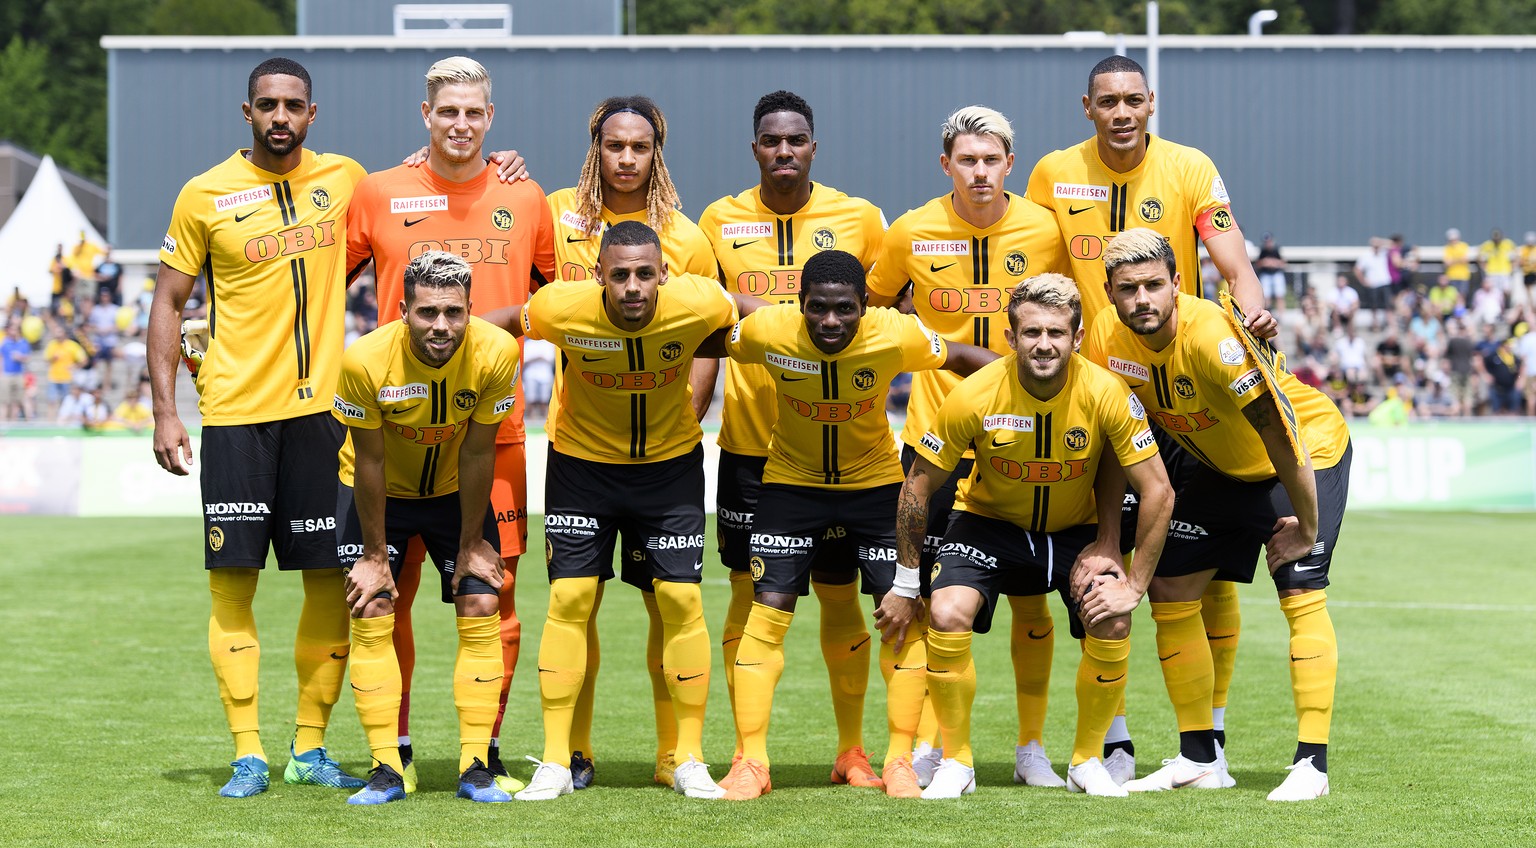 YBs players take a pose during a friendly soccer match of the international Uhrencup tournament between Switzerland's BSC Young Boys and England's Wolverhampton Wanderers F.C. at the Stadion Neufeld i ...